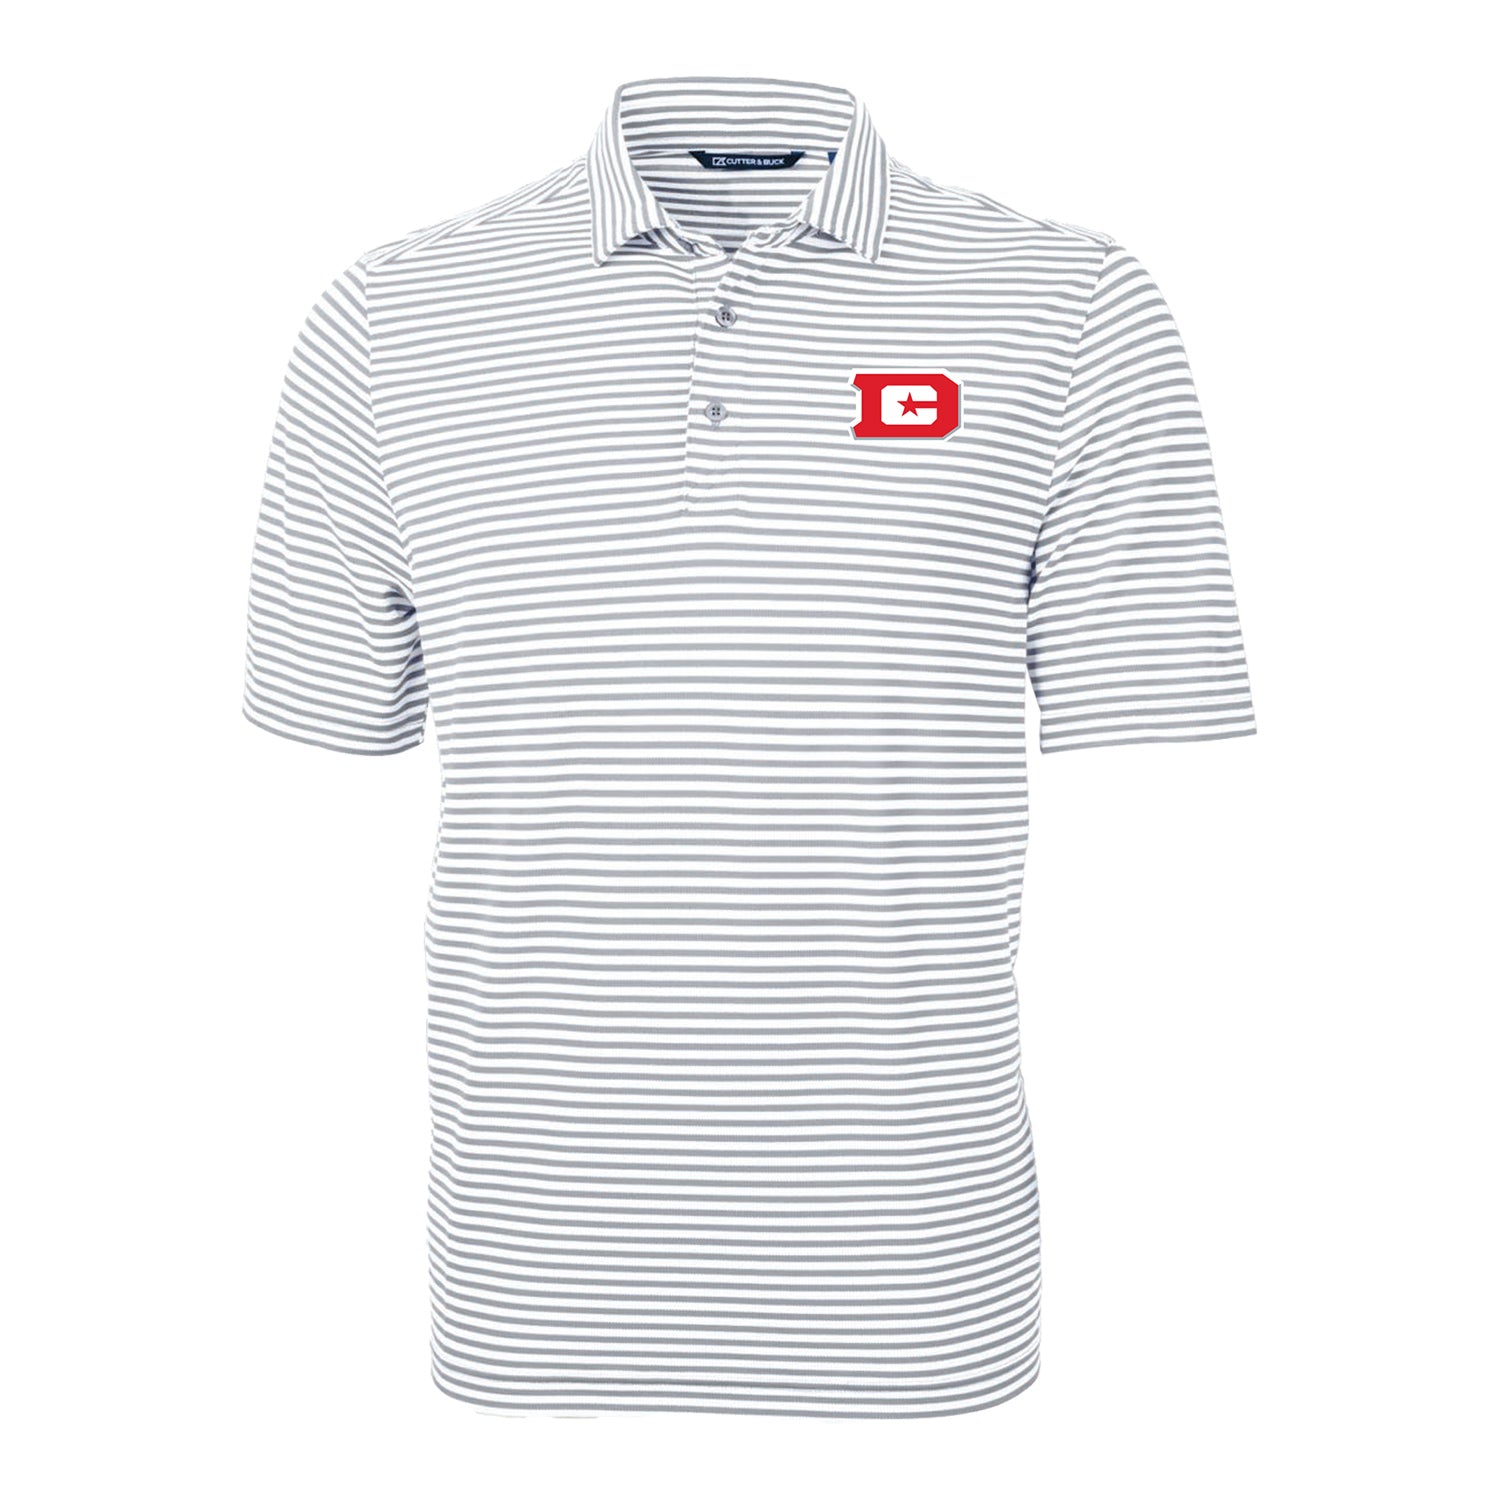 D.C. Defenders Cutter & Buck Virtue Eco Pique Stripe Recycled Polo In White - Front View